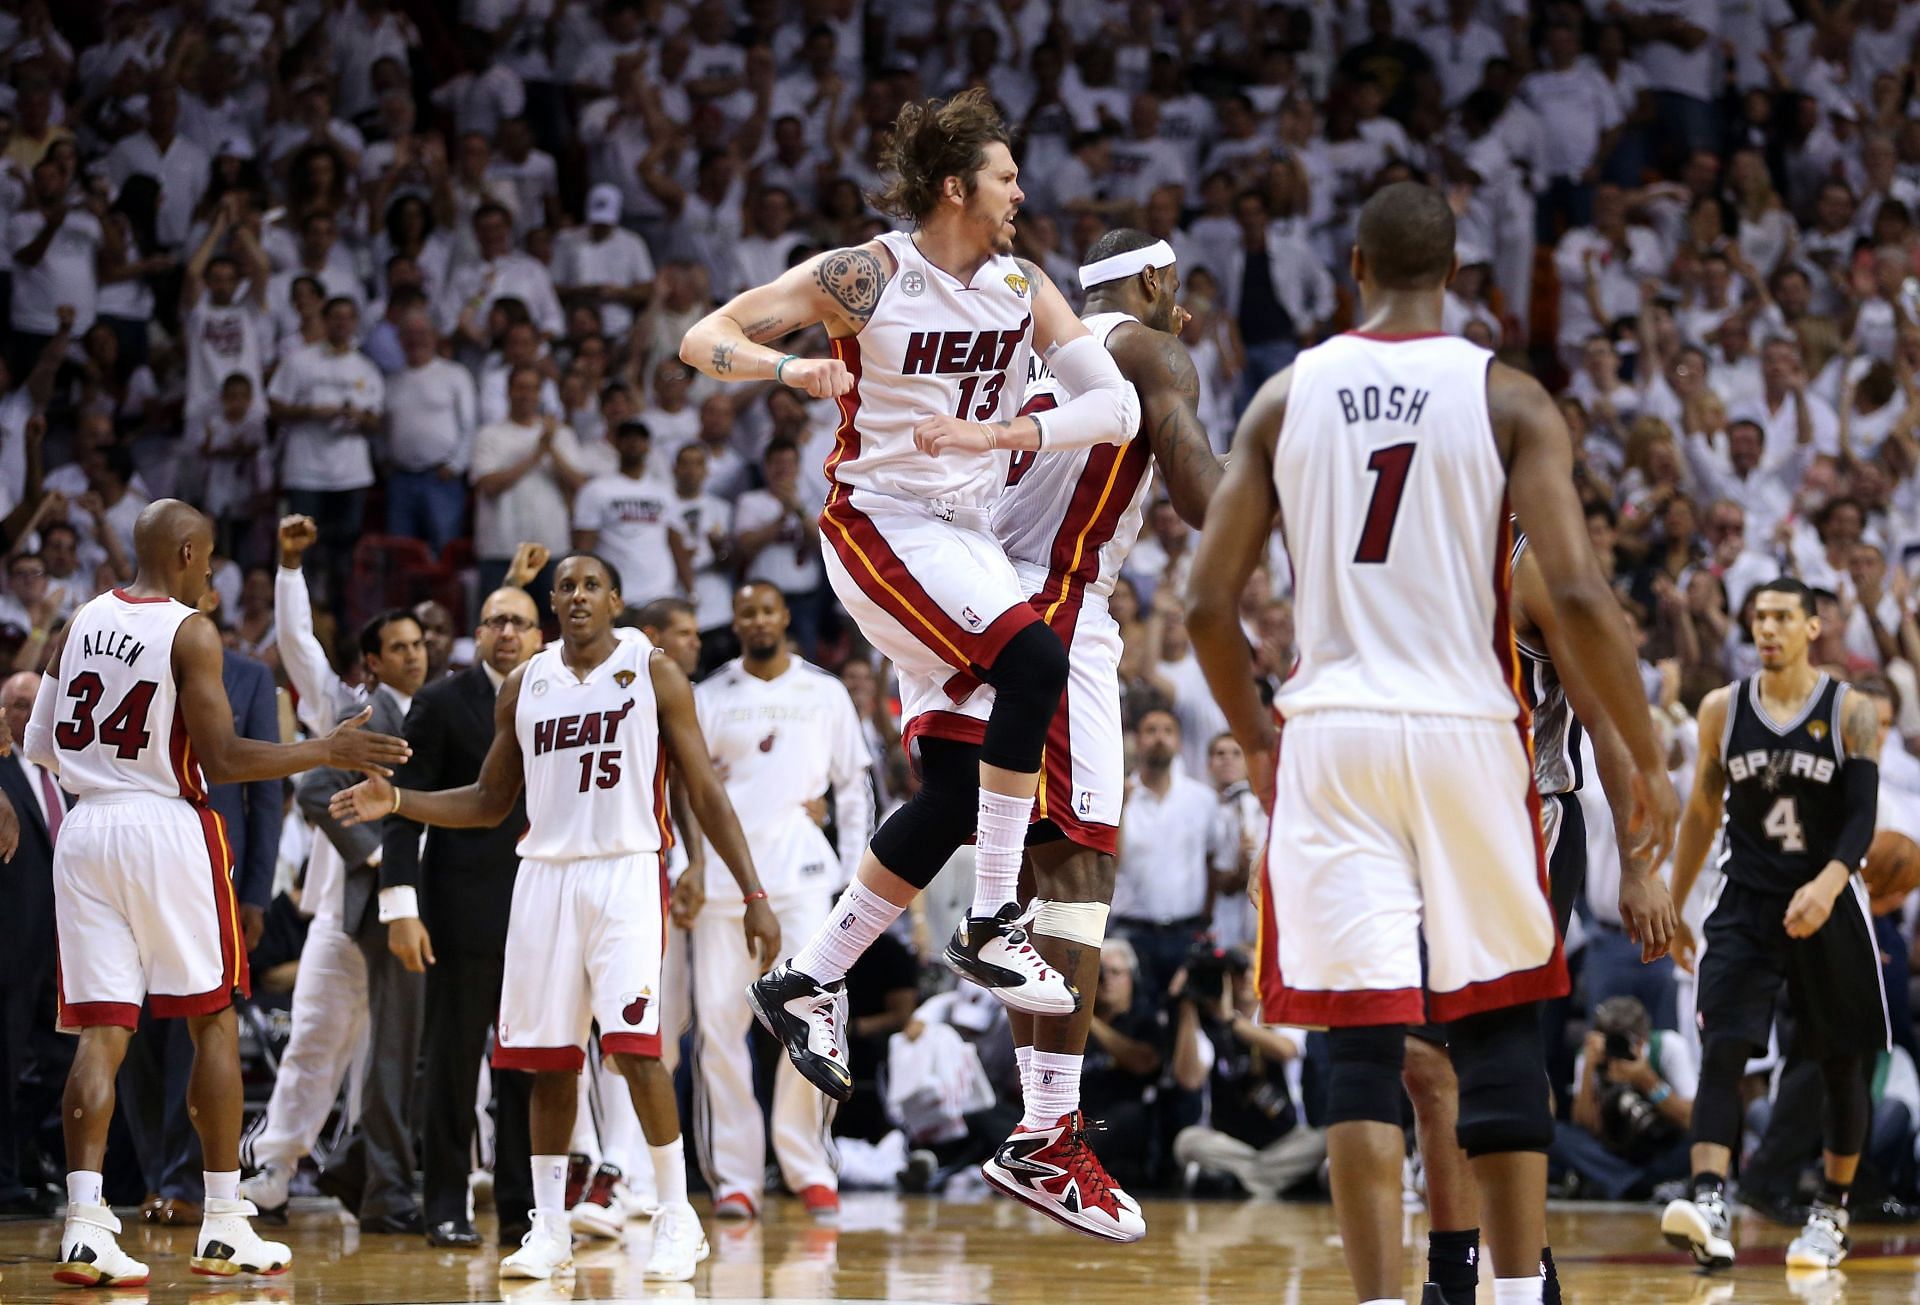 Mike Miller and LeBron James of the Miami Heat celebrate after a basket. (Photo Courtesy of @kingjames/Instagram)